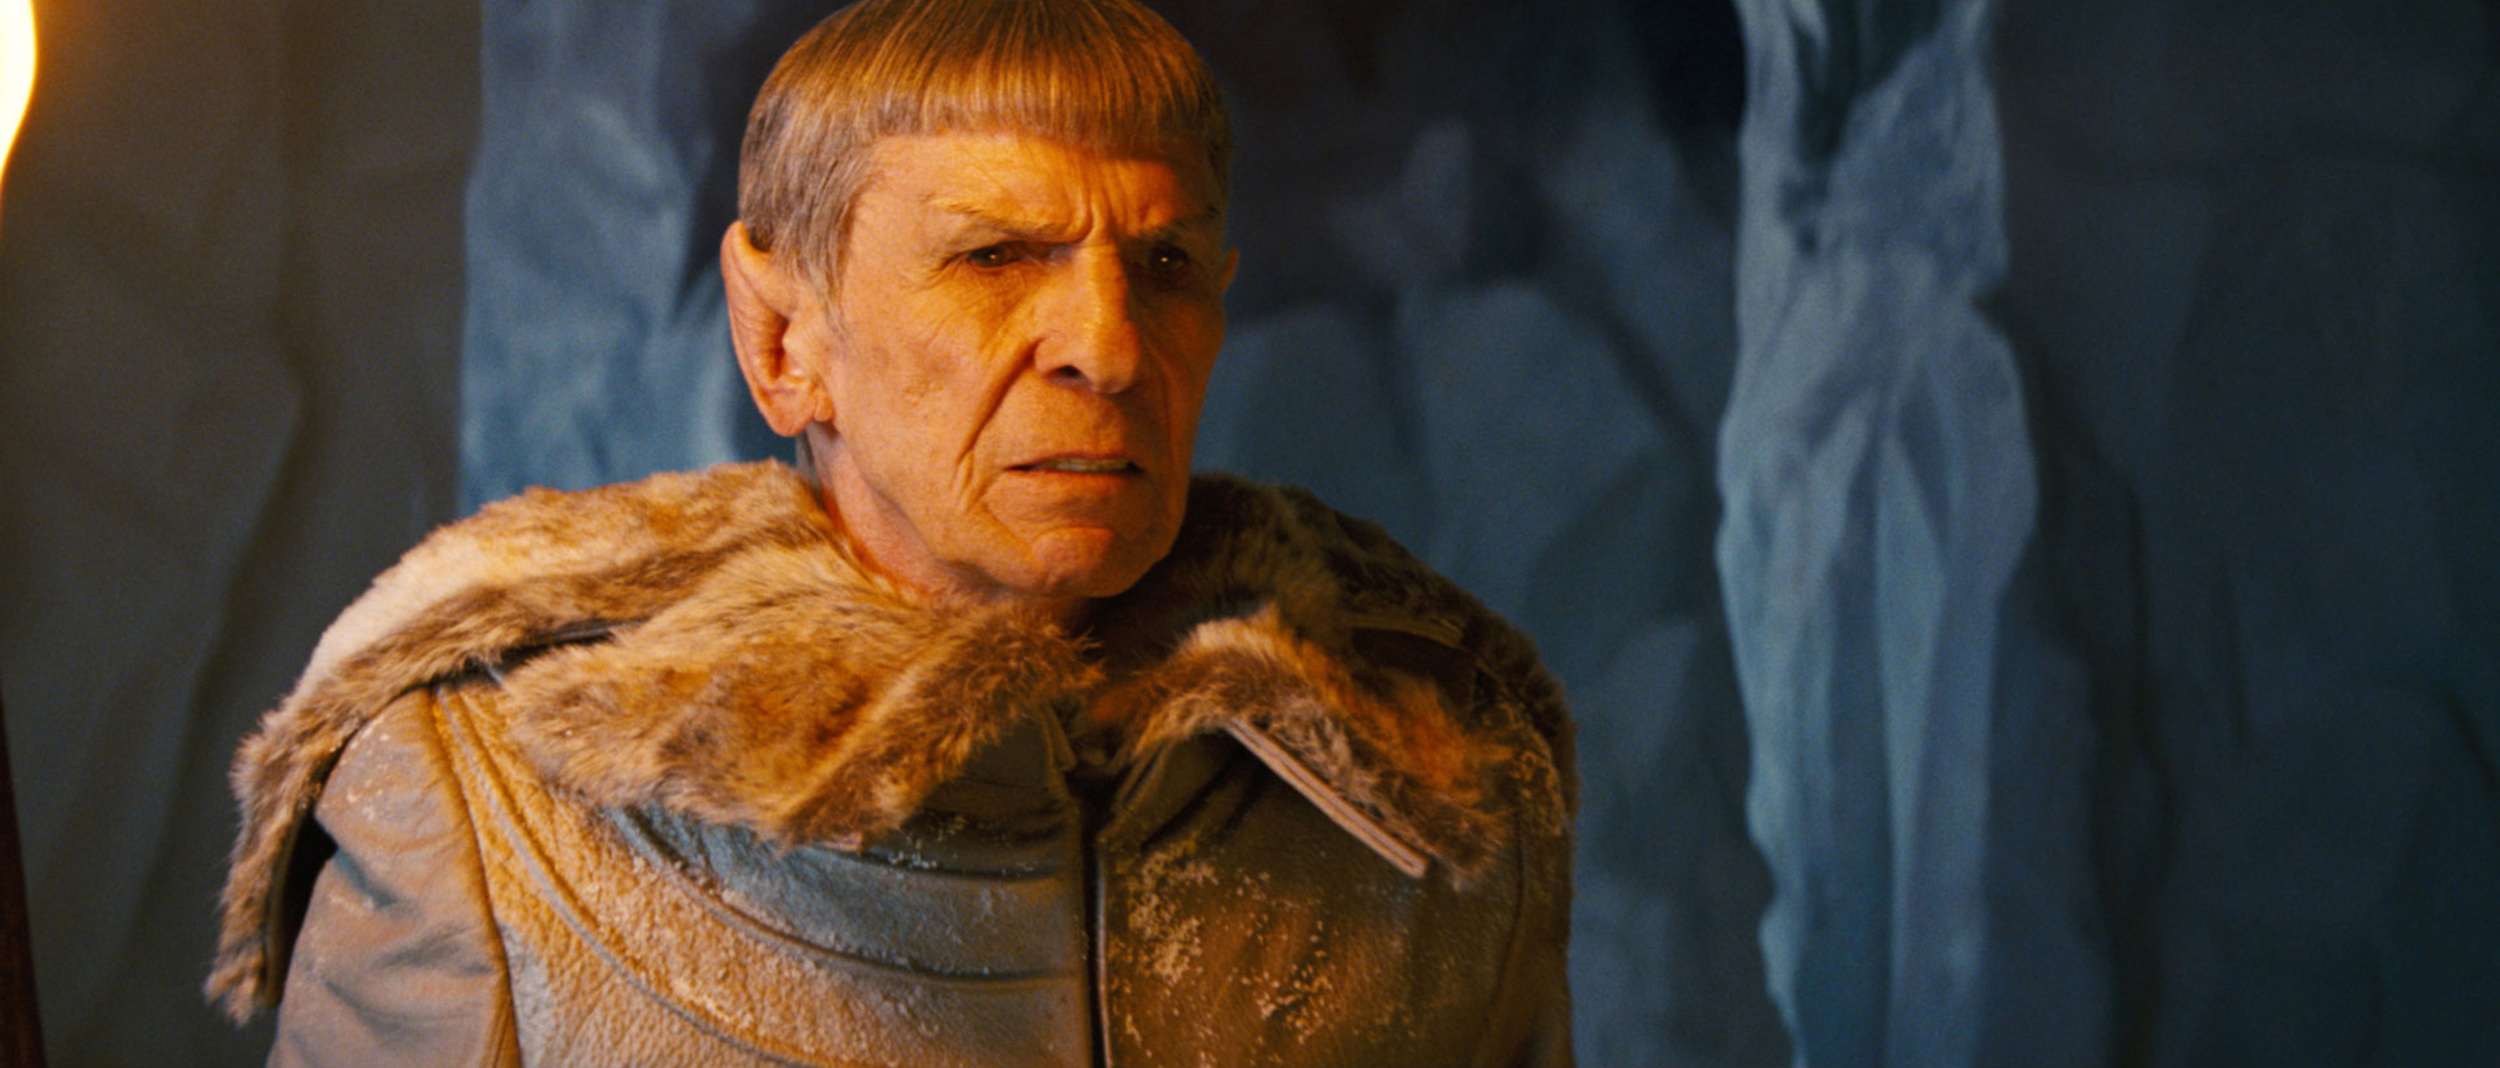 <p>One of the triumphs of <em>Star Trek</em> is the return of Leonard Nimoy as Spock, or Spock Prime as he is called. William Shatner was offered a cameo as Kirk, but he wanted a bigger role, one on par with Nimoy. Abrams declined. Nichols also wanted to play Uhura’s grandmother, but this came during the Writer’s Guild strike, so Abrams could not write that scene without crossing the picket line, so it didn’t come to fruition.</p><p><a href='https://www.msn.com/en-us/community/channel/vid-cj9pqbr0vn9in2b6ddcd8sfgpfq6x6utp44fssrv6mc2gtybw0us'>Follow us on MSN to see more of our exclusive entertainment content.</a></p>